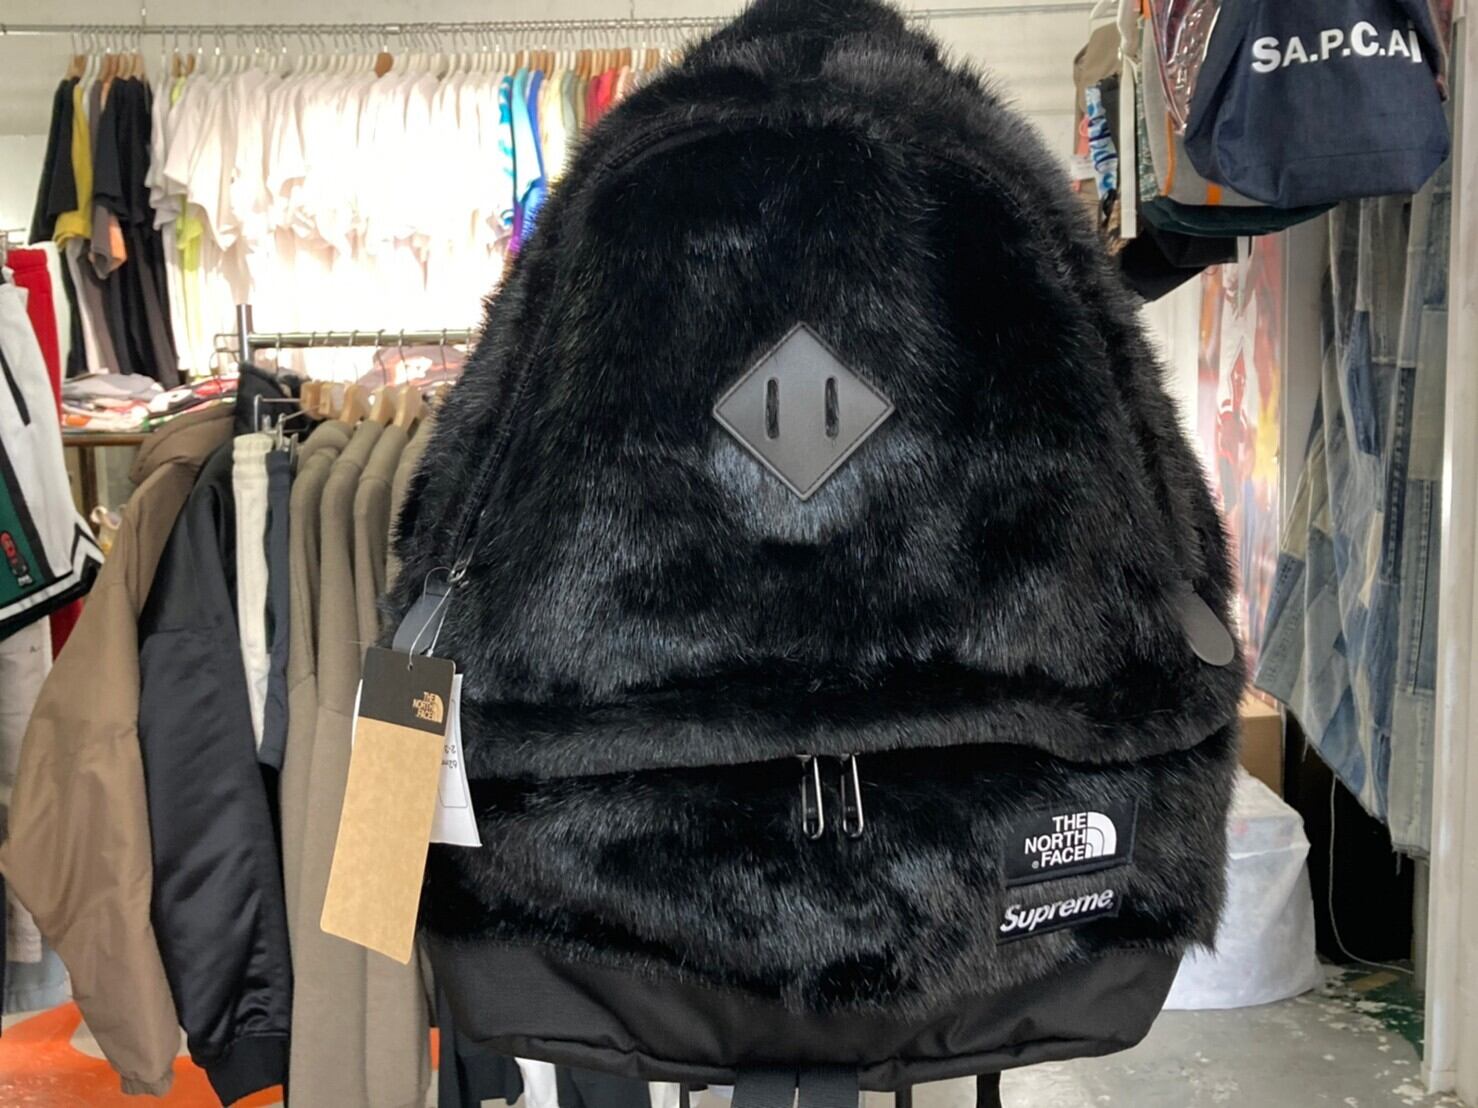 U5-4 20AW Face Faux Fur Backpack